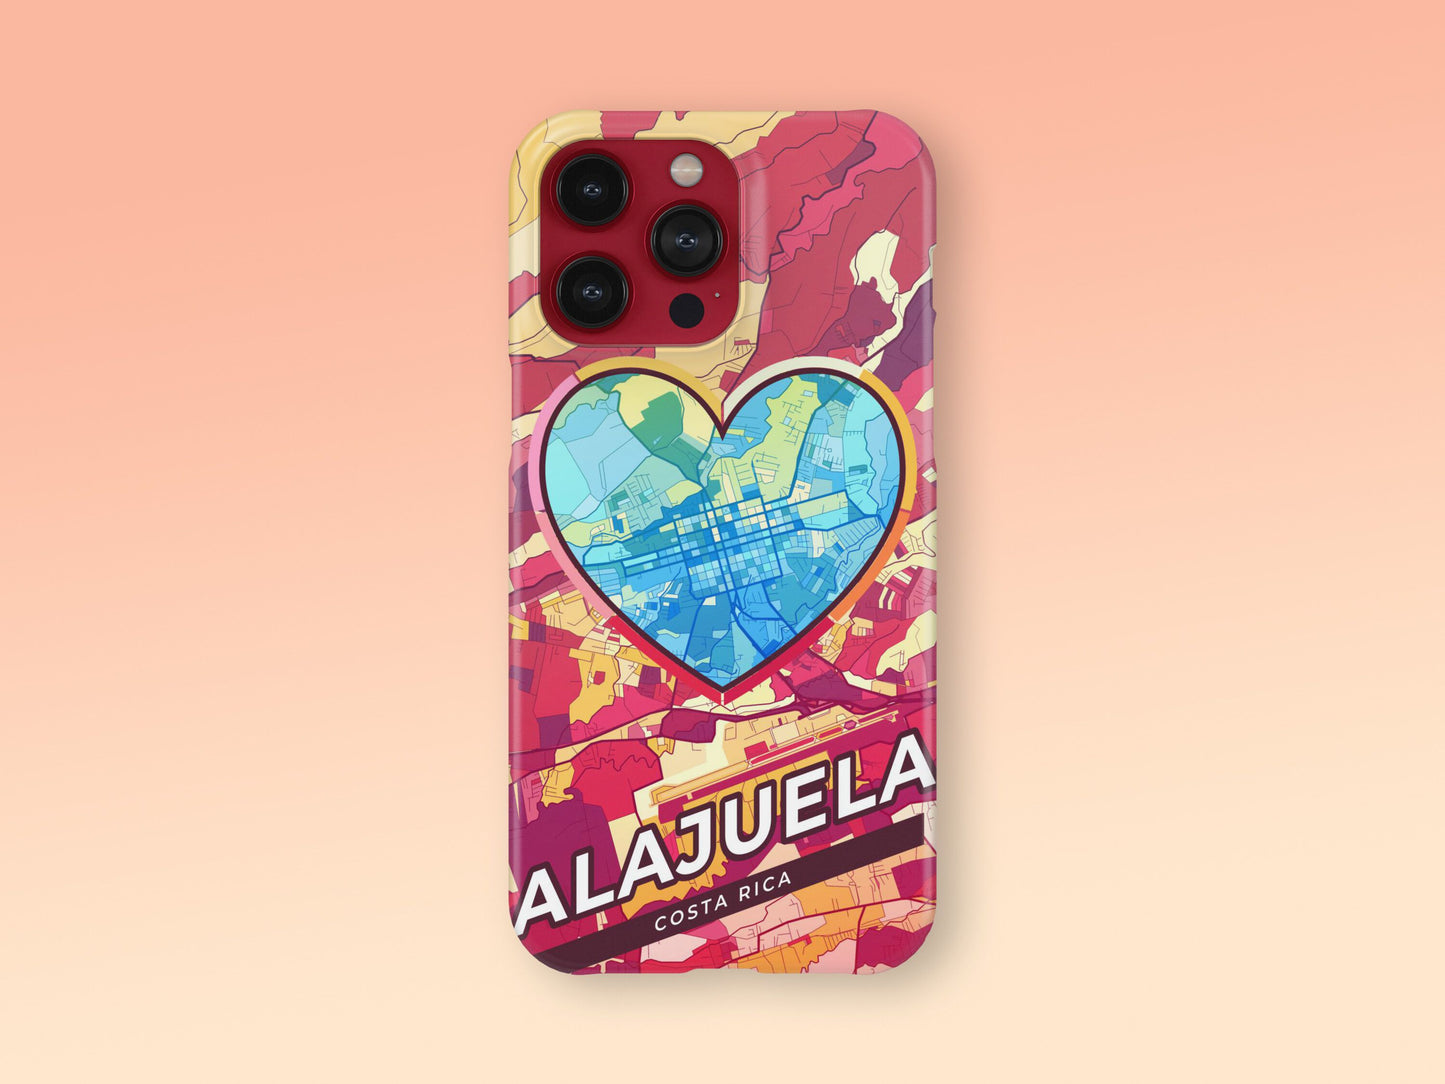 Alajuela Costa Rica slim phone case with colorful icon. Birthday, wedding or housewarming gift. Couple match cases. 2